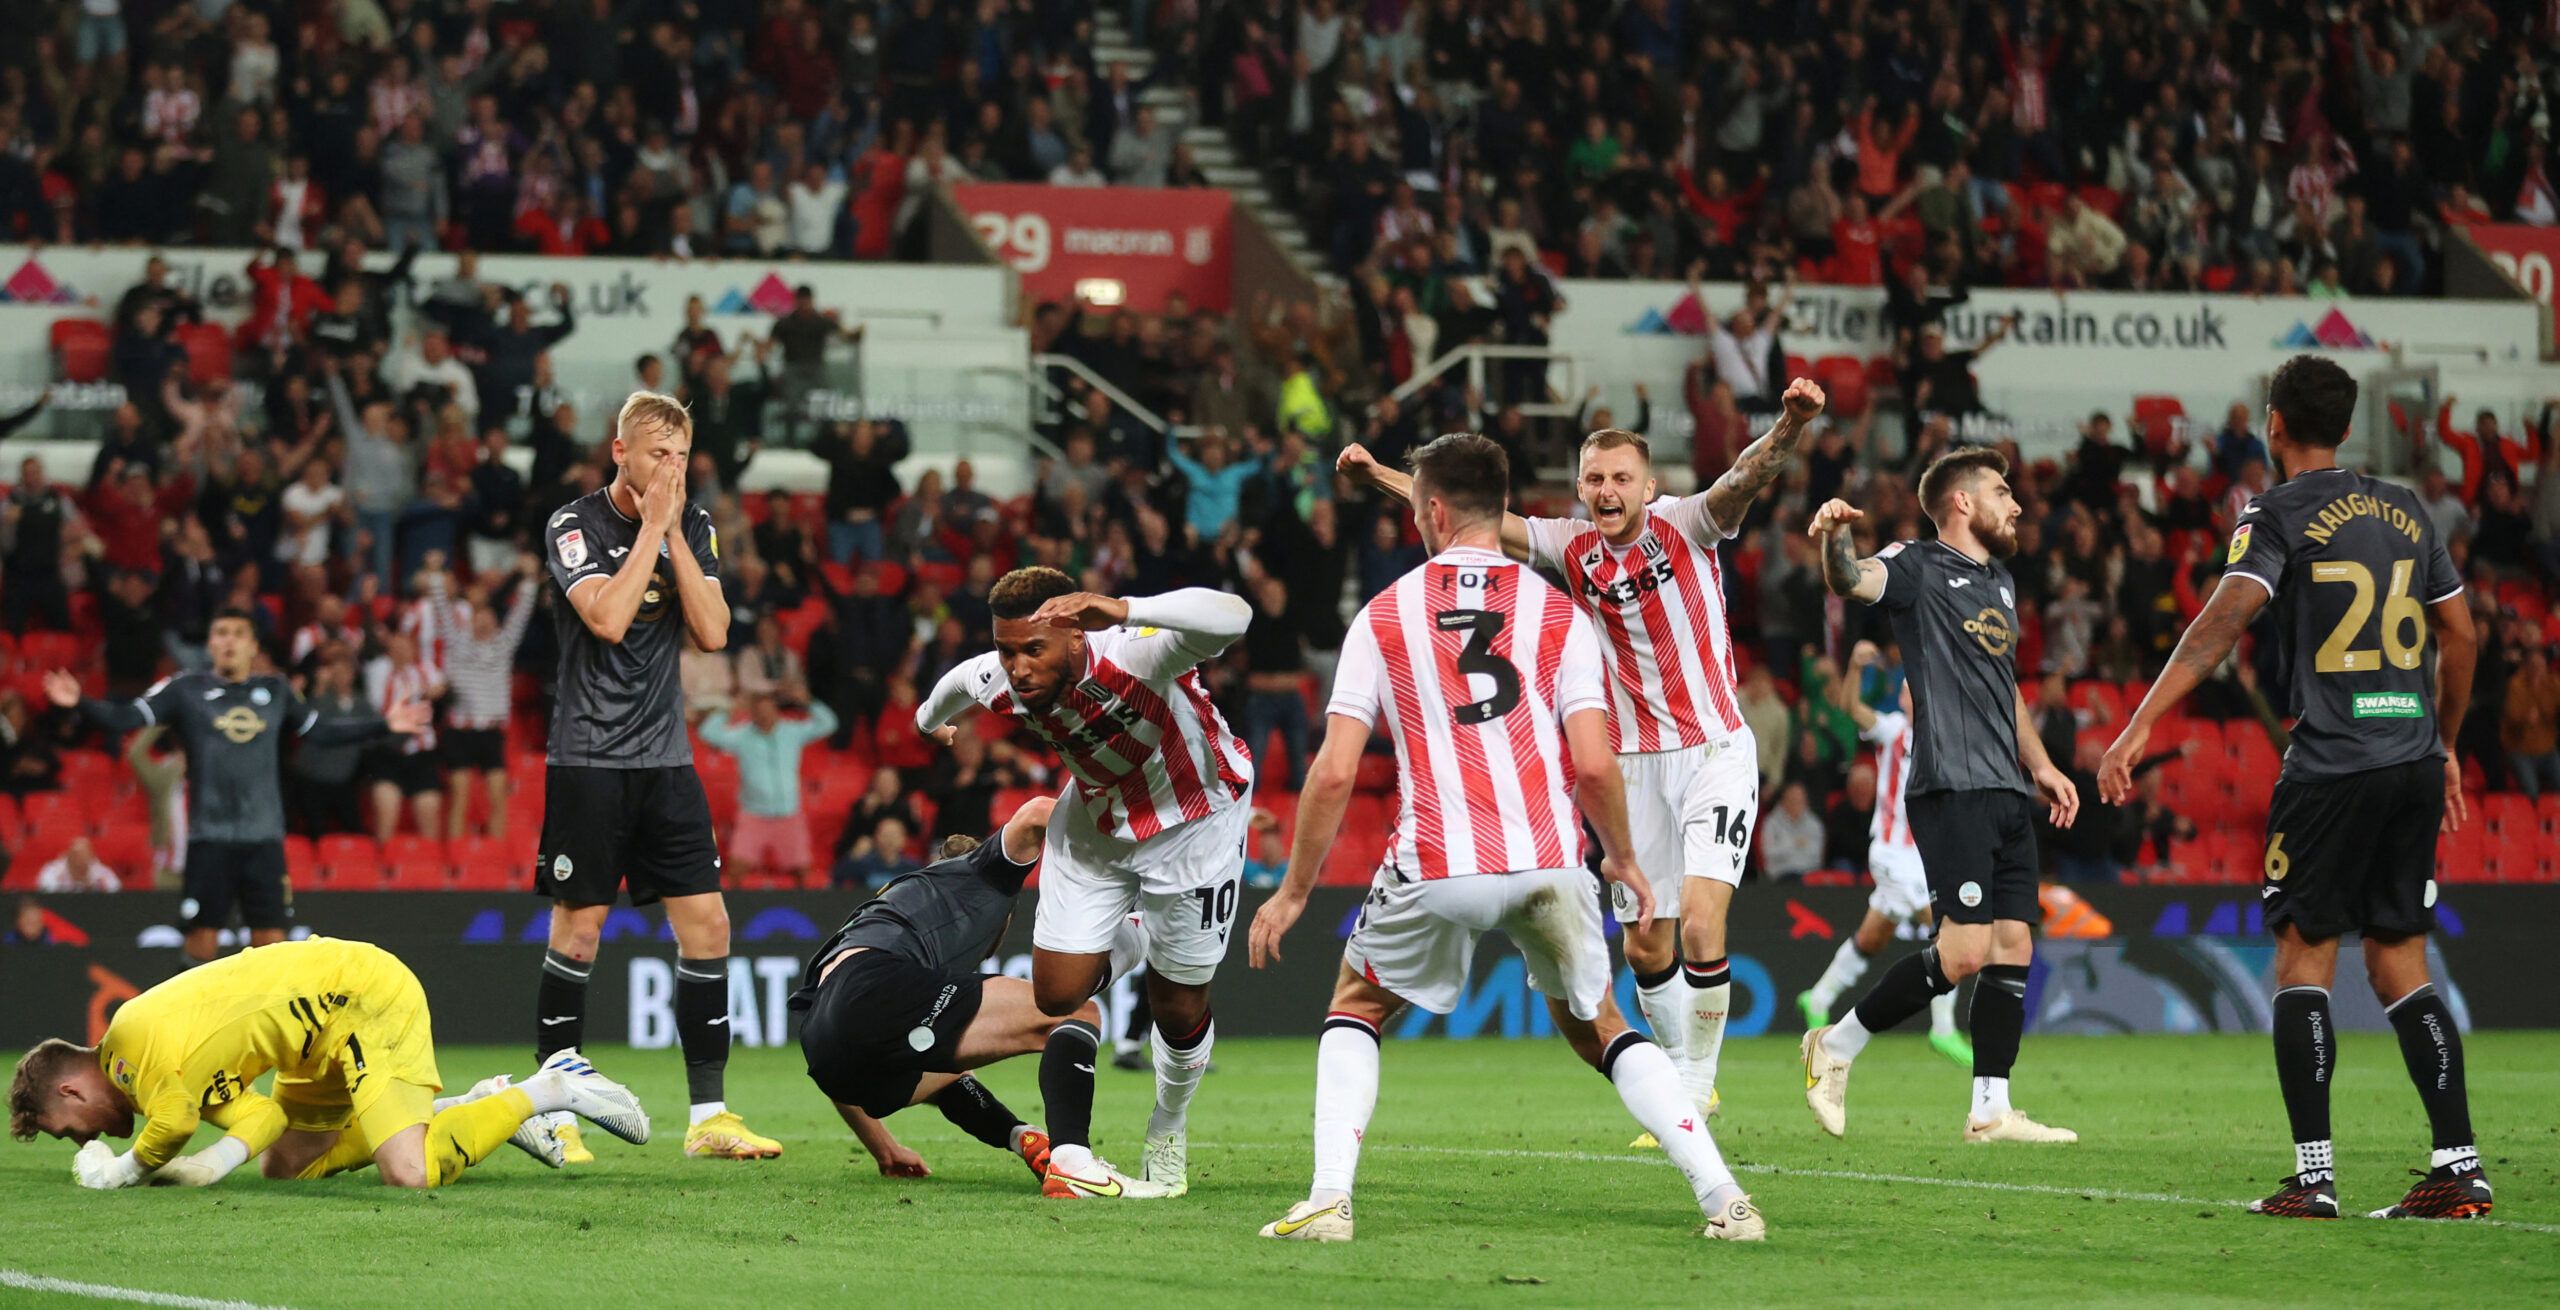 Soccer Football - Championship - Stoke City v Swansea City - bet365 Stadium, Stoke-on-Trent, Britain - August 31, 2022 Stoke City?s Tyrese Campbell celebrates scoring their first goal with Ben Wilmot and Morgan Fox  Action Images/Carl Recine  EDITORIAL USE ONLY. No use with unauthorized audio, video, data, fixture lists, club/league logos or 